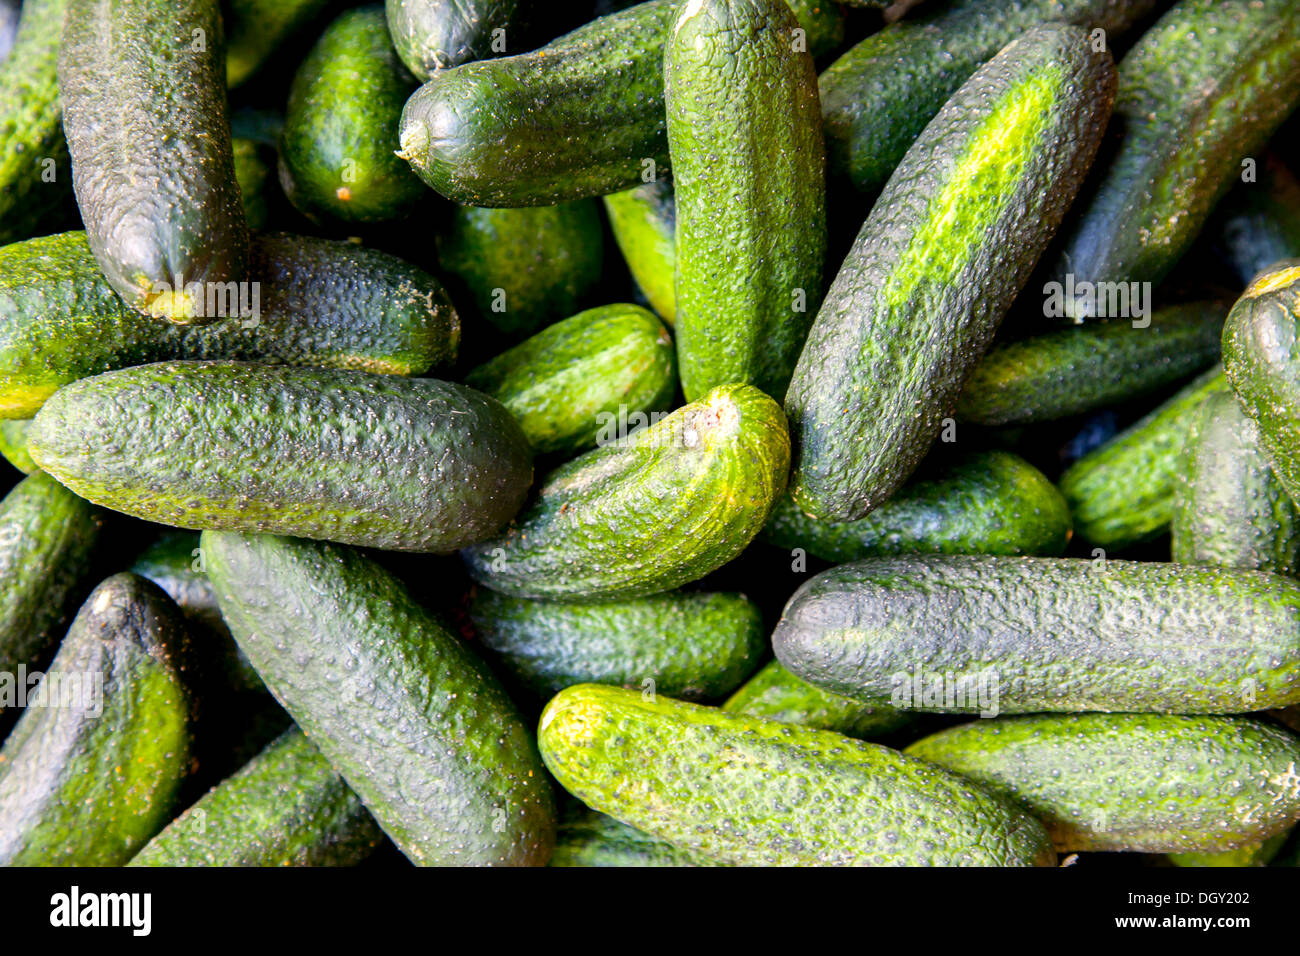 Pickling cucumbers, Hambourg, Hambourg, Allemagne Banque D'Images